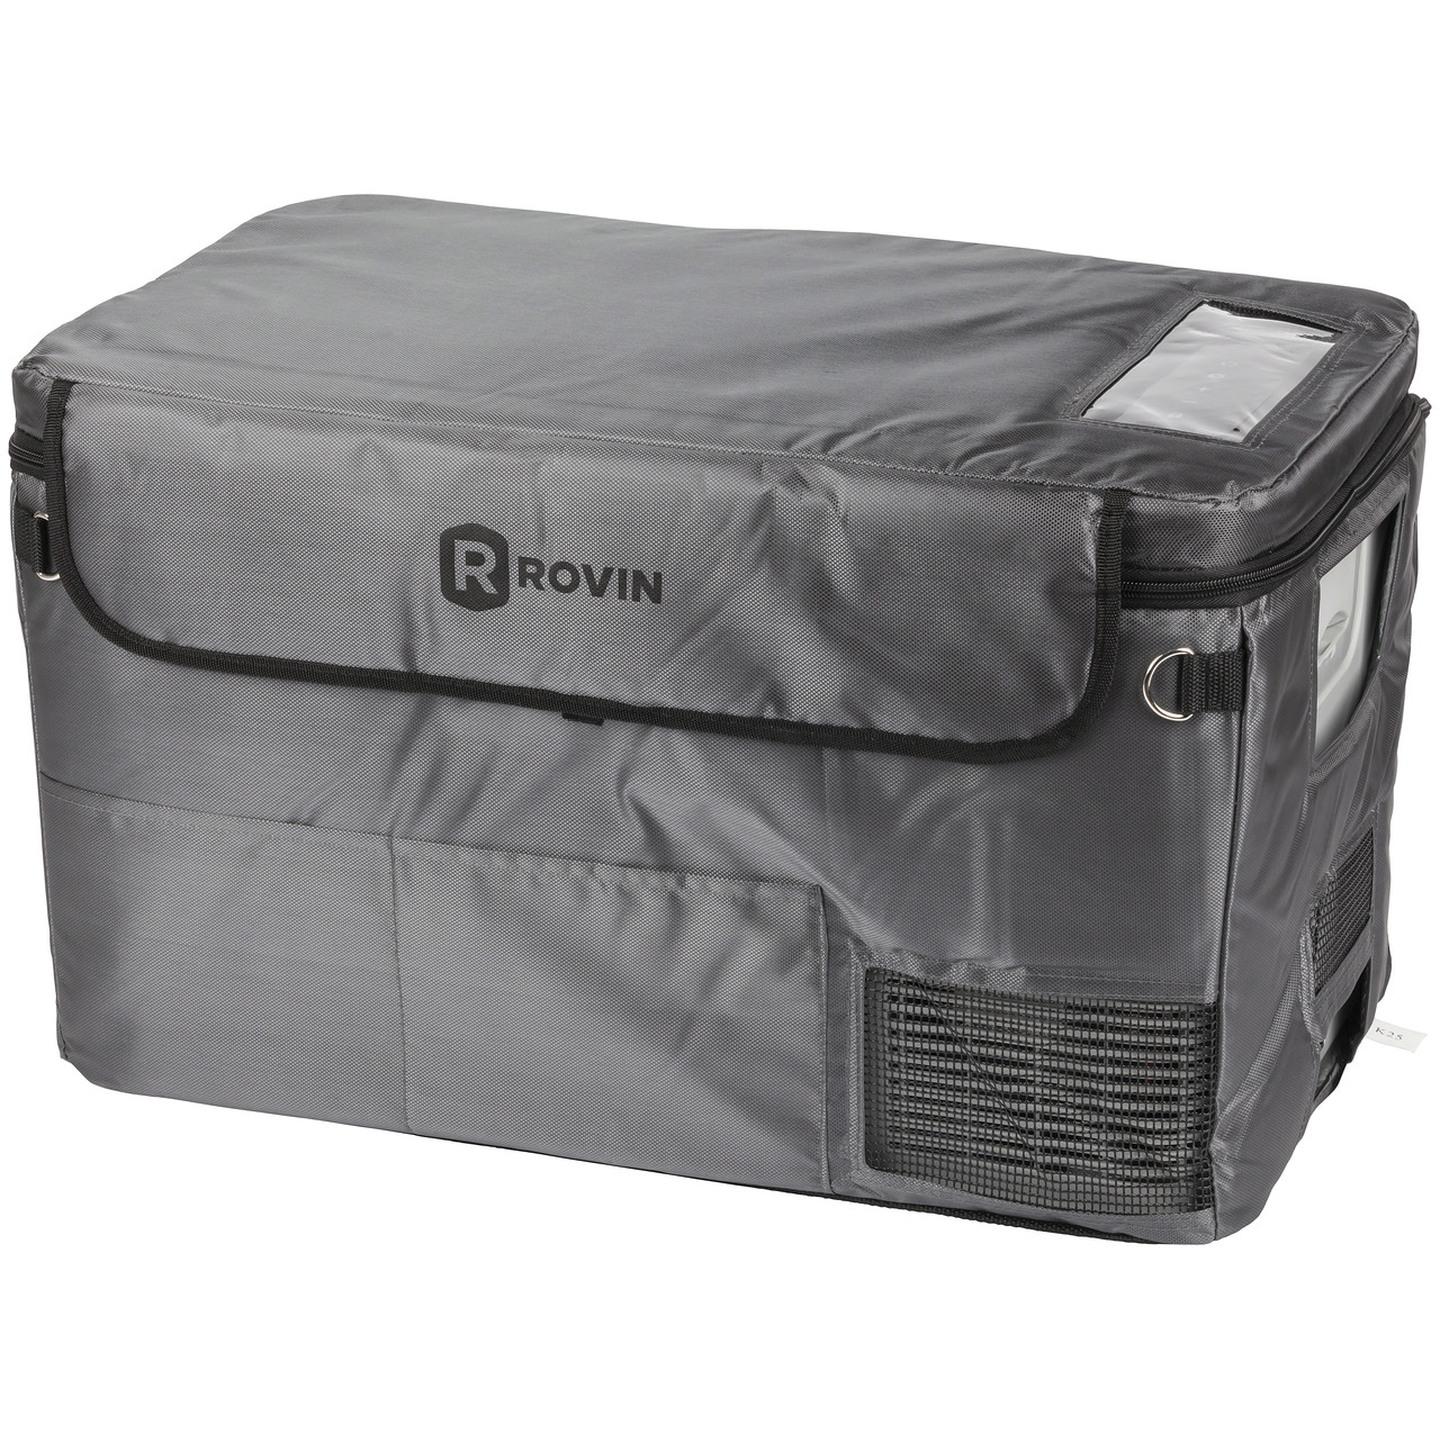 Grey Insulated Cover for 25L Rovin Portable Fridge Freezer